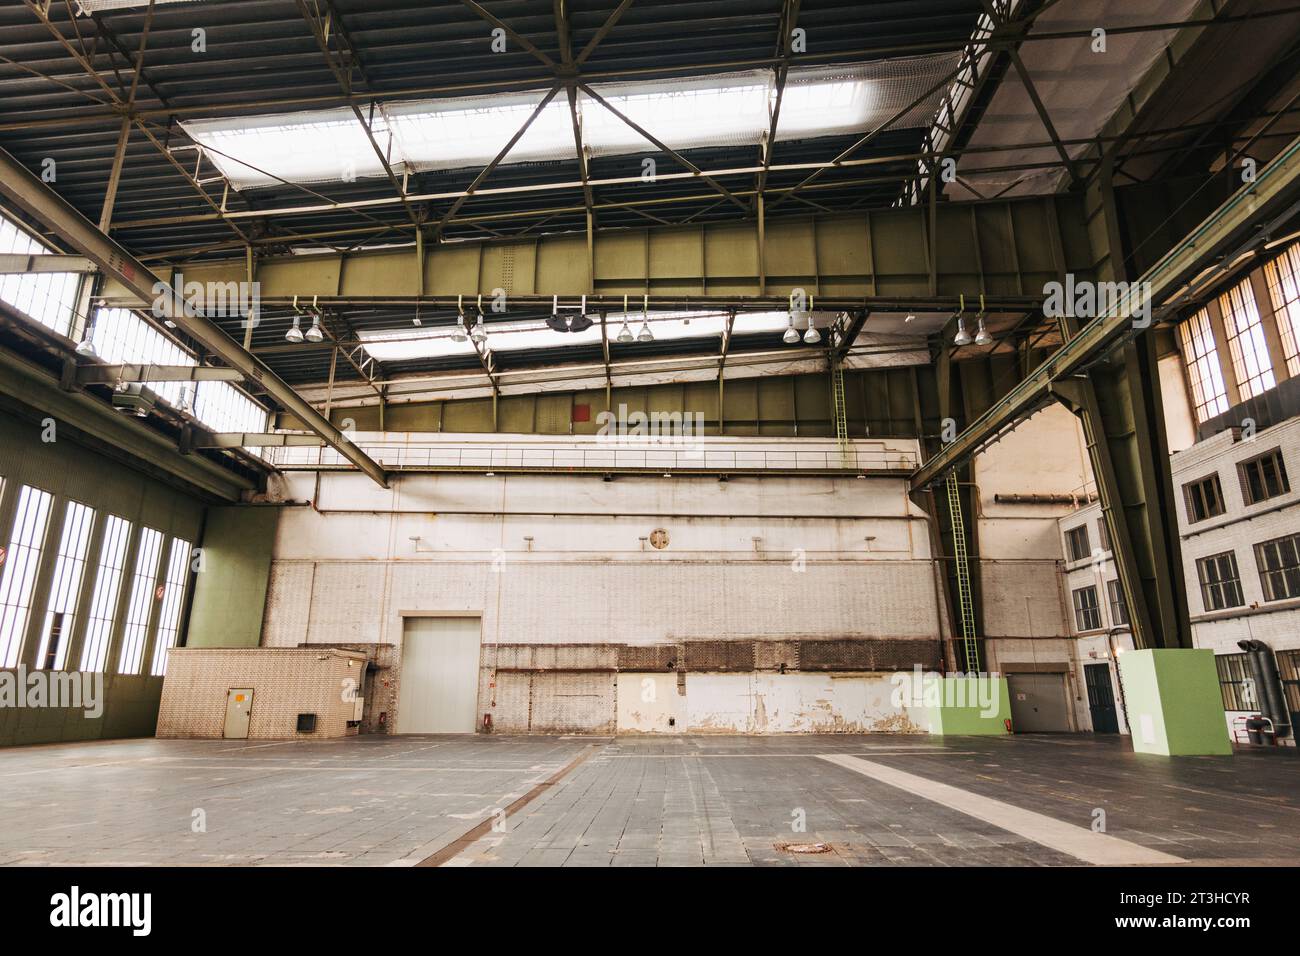 inside an empty hangar at Berlin Tempelhof Airport, Germany. Famed for its role in the Berlin Airlift, the airport closed in 2008 Stock Photo